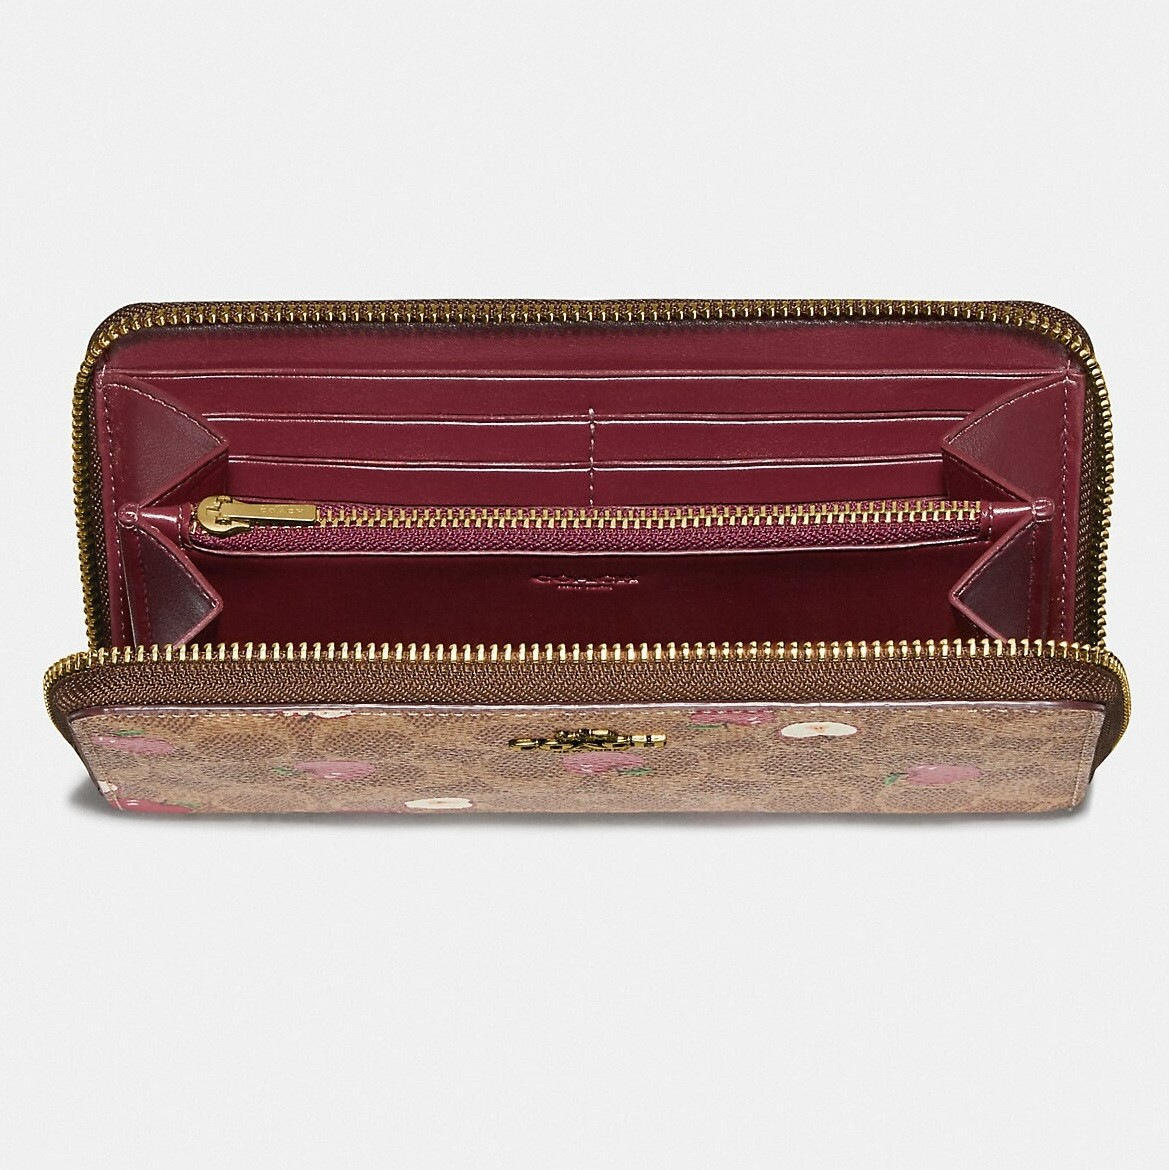 VÍ DÀI NỮ COACH TRÁI TÁO ĐỎ ACCORDION ZIP WALLET IN SIGNATURE CANVAS WITH SCATTERED APPLE PRINT 1